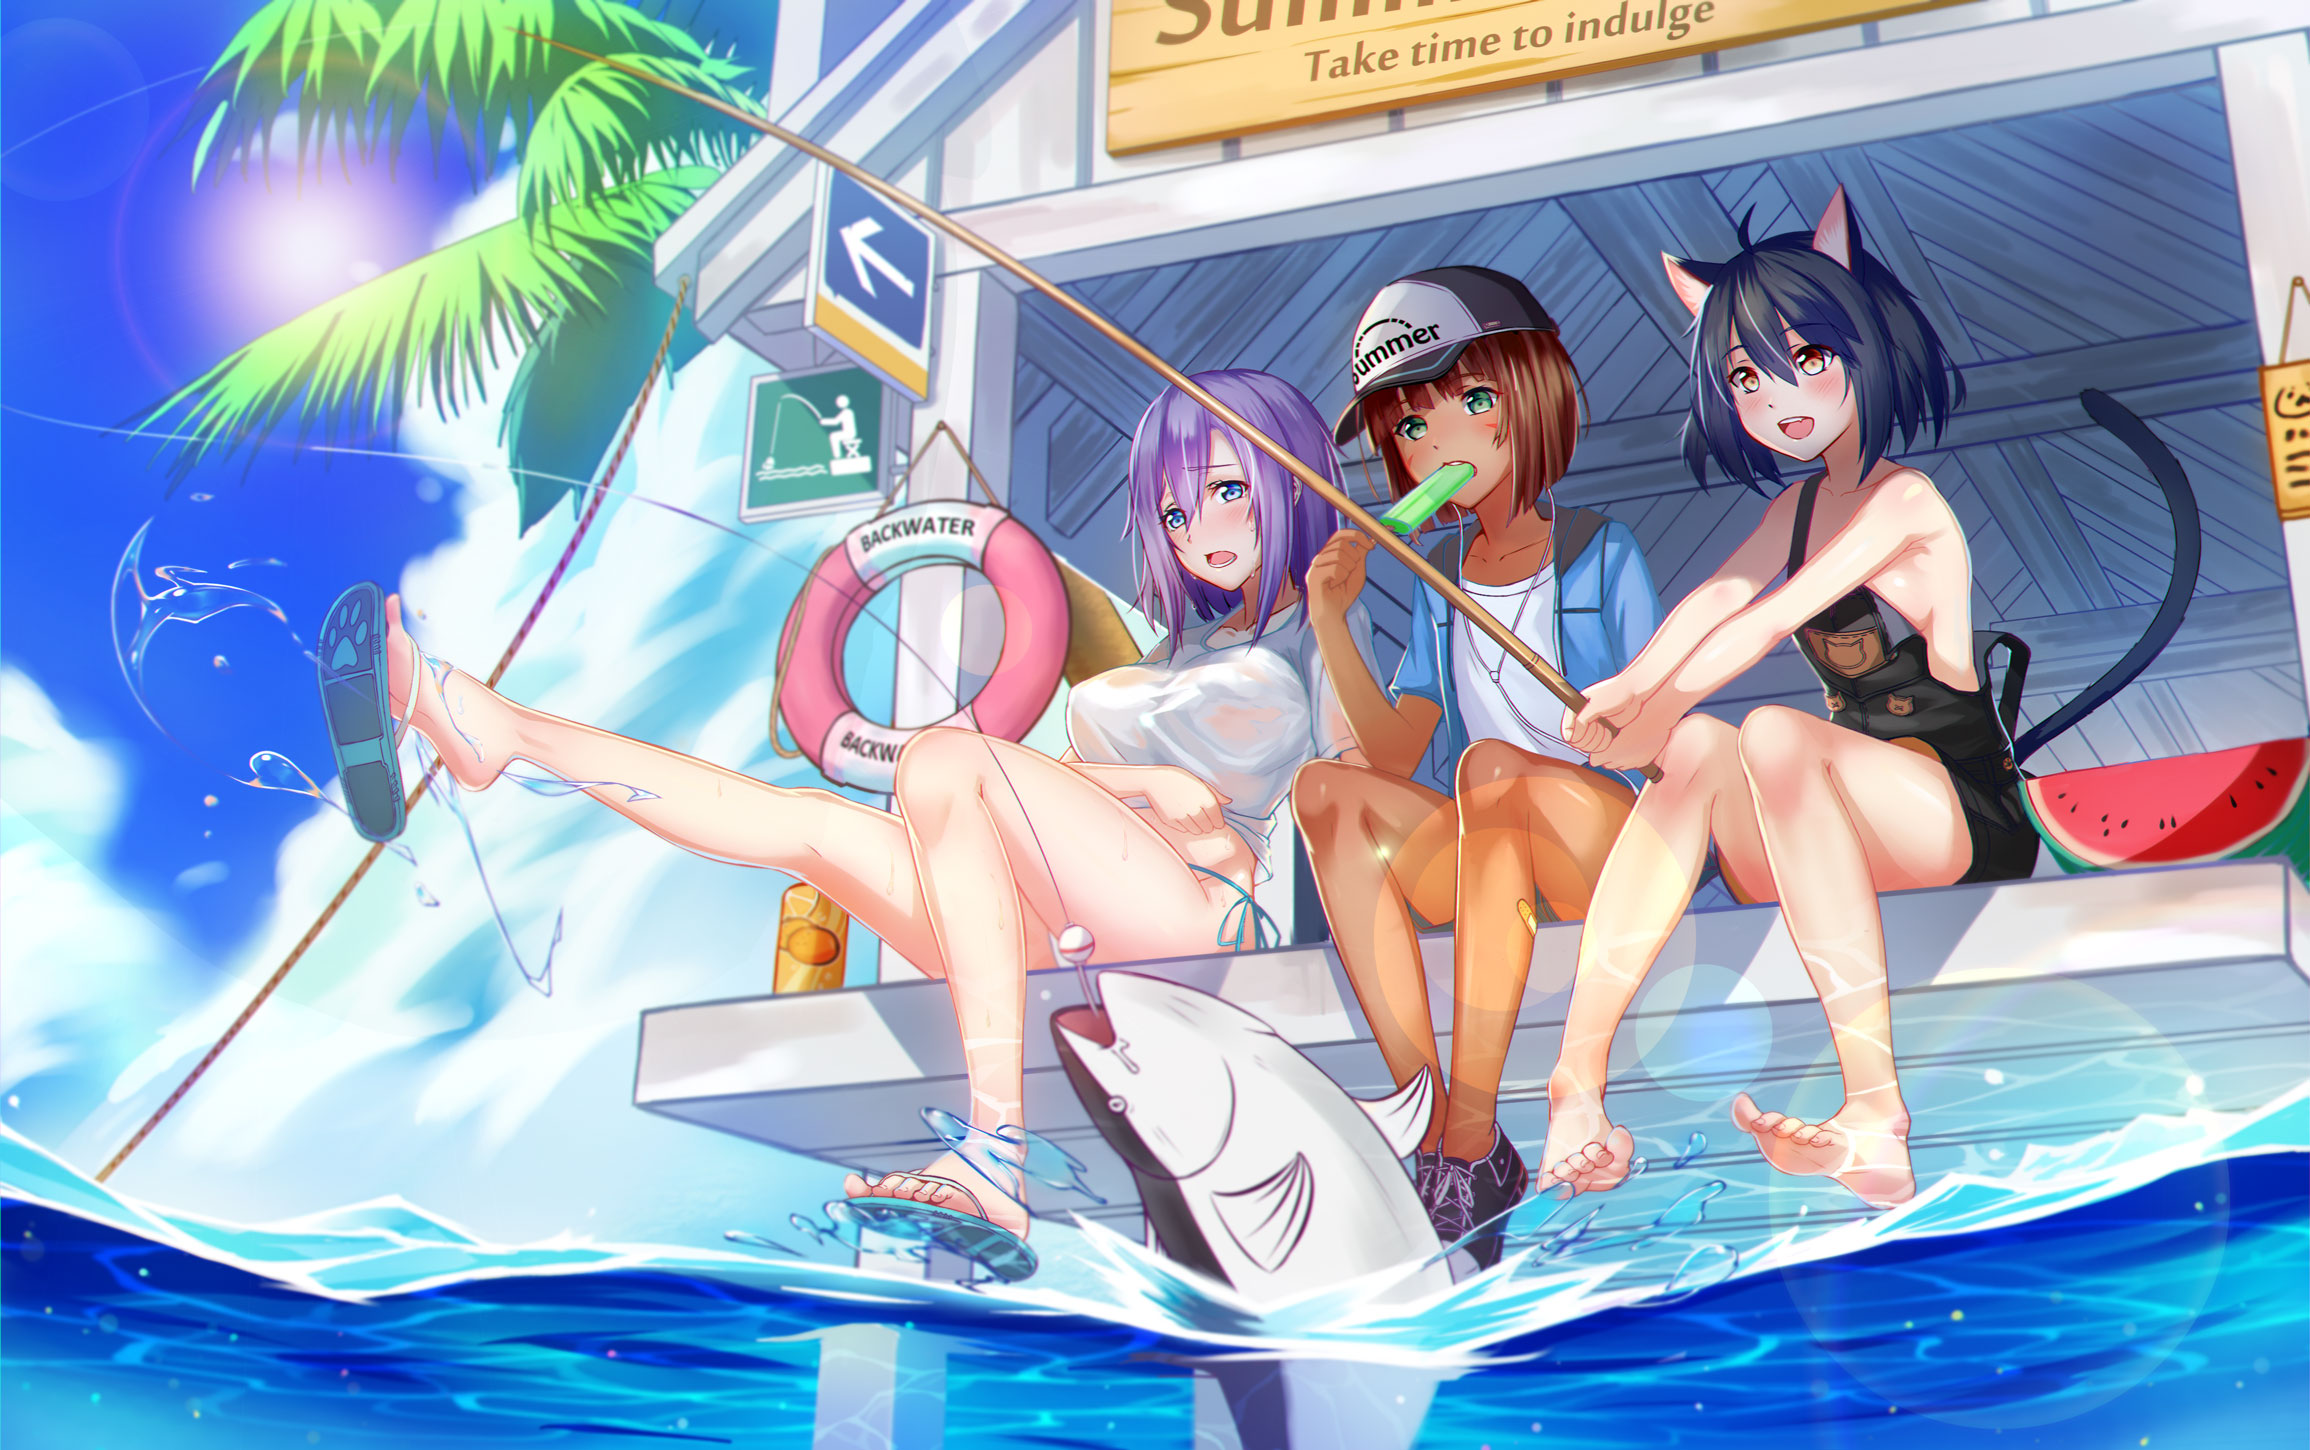 Anime 2310x1450 sky water tail fish wet clothing fishing rod ice cream short hair cat girl women trio watermelons group of women floater palm trees clouds sideboob